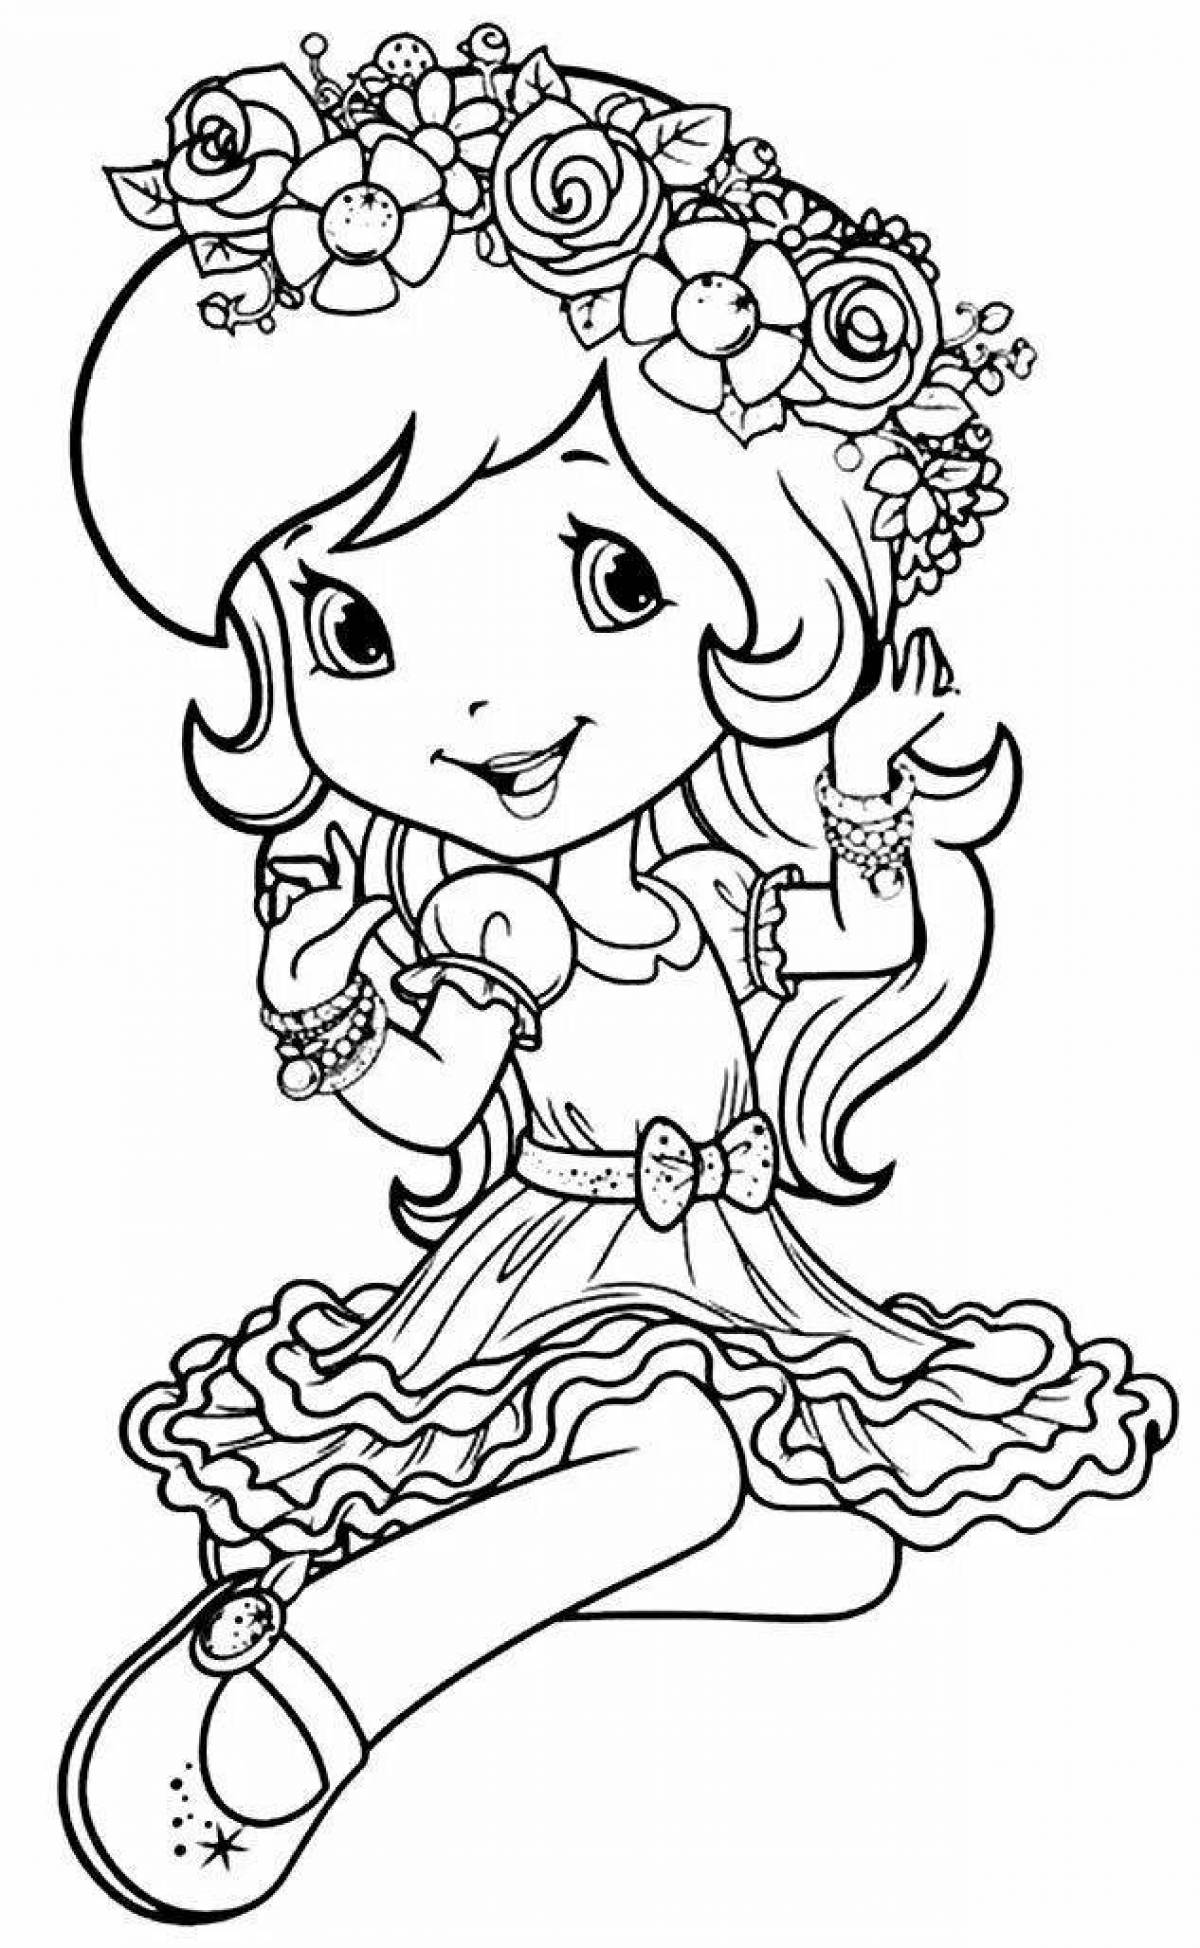 Glowing strawberry coloring page